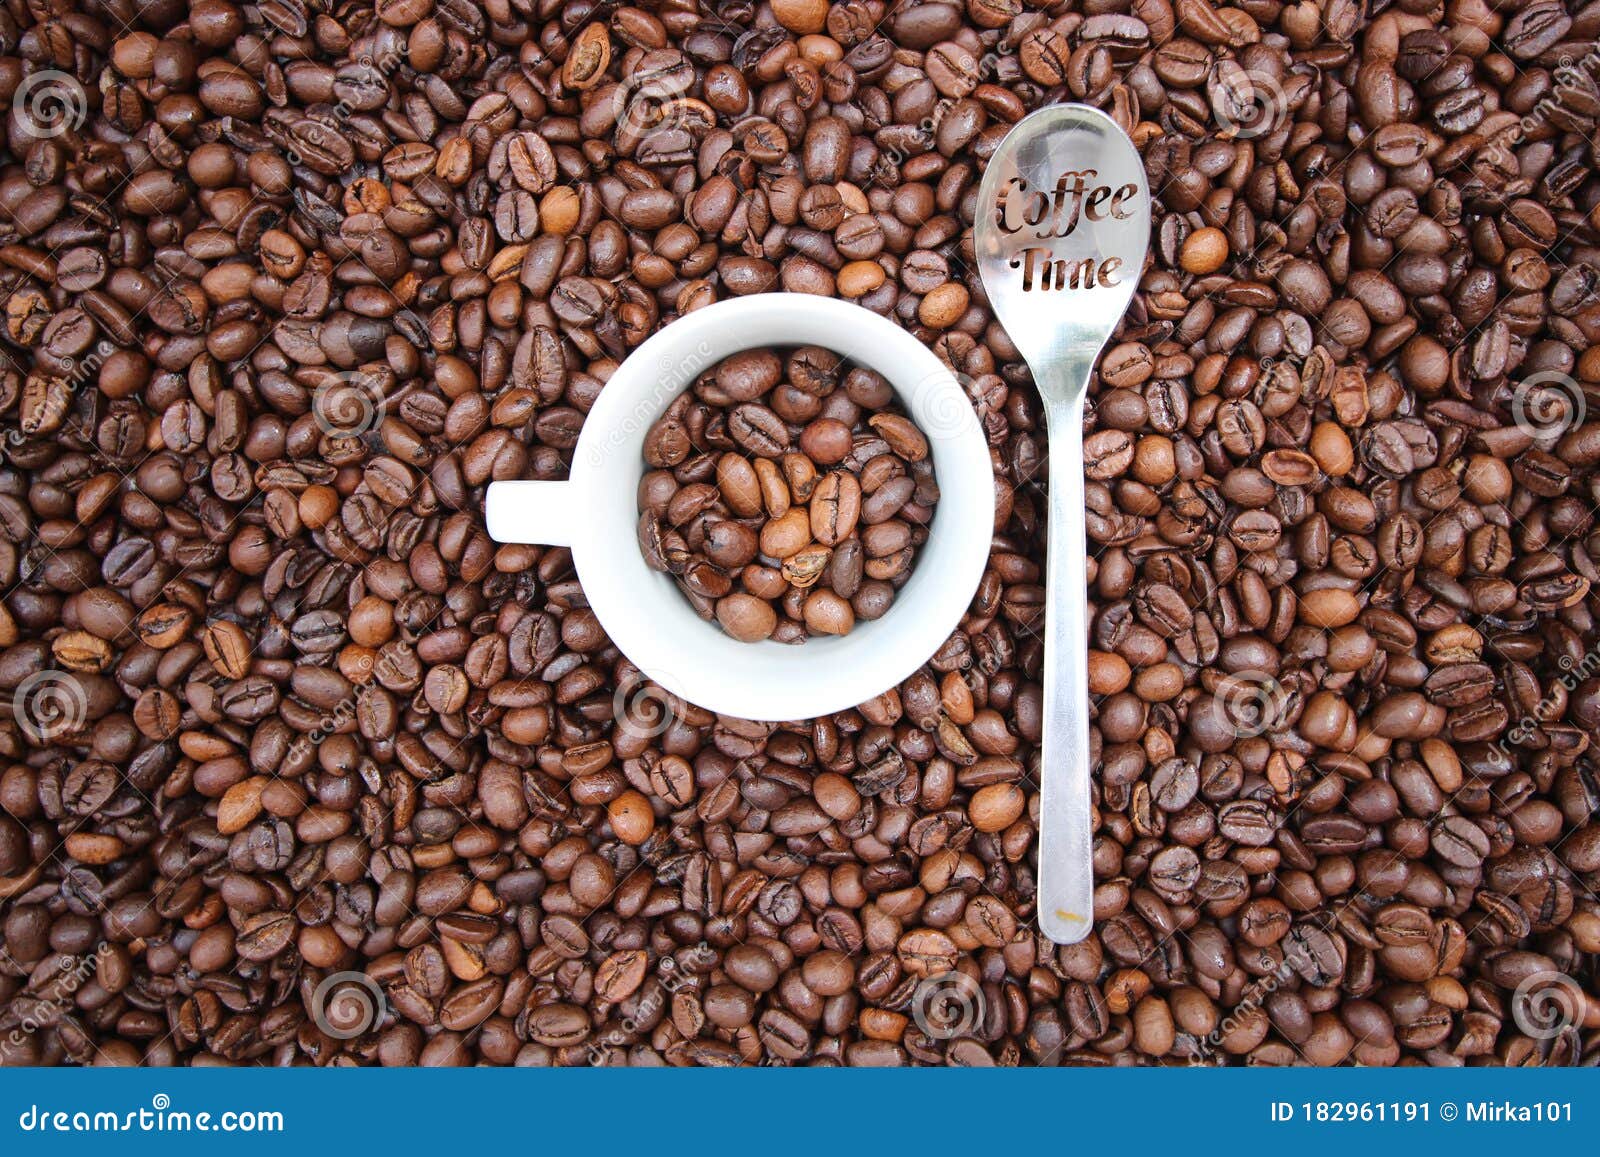 background with many coffee beans.